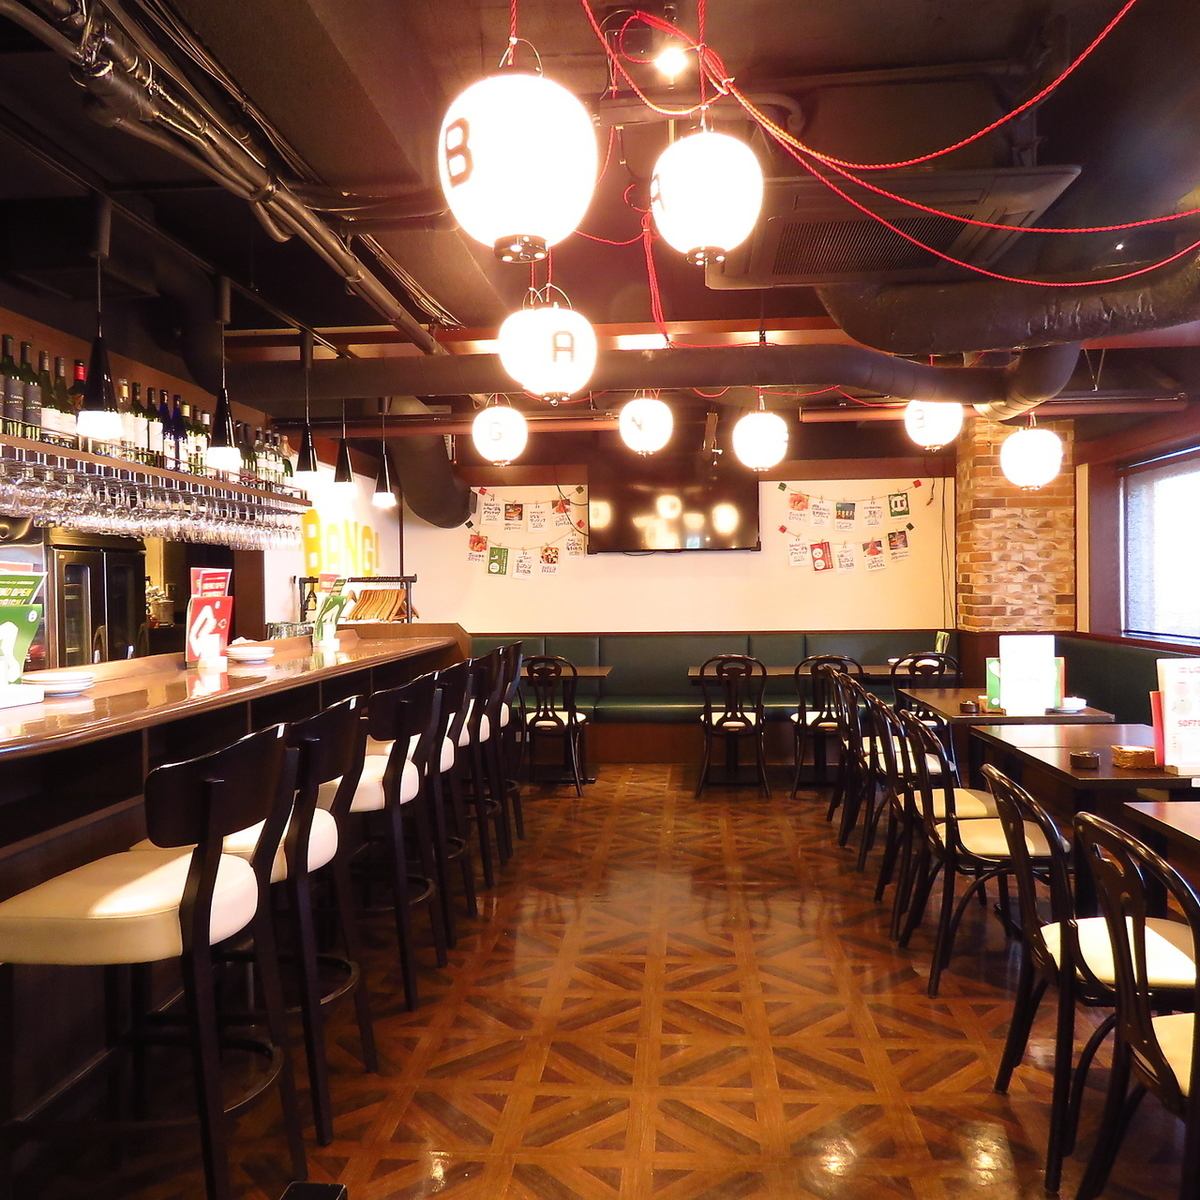 Leave it to us for banquets for 20 people or more! Italian izakaya near Sapporo Station!